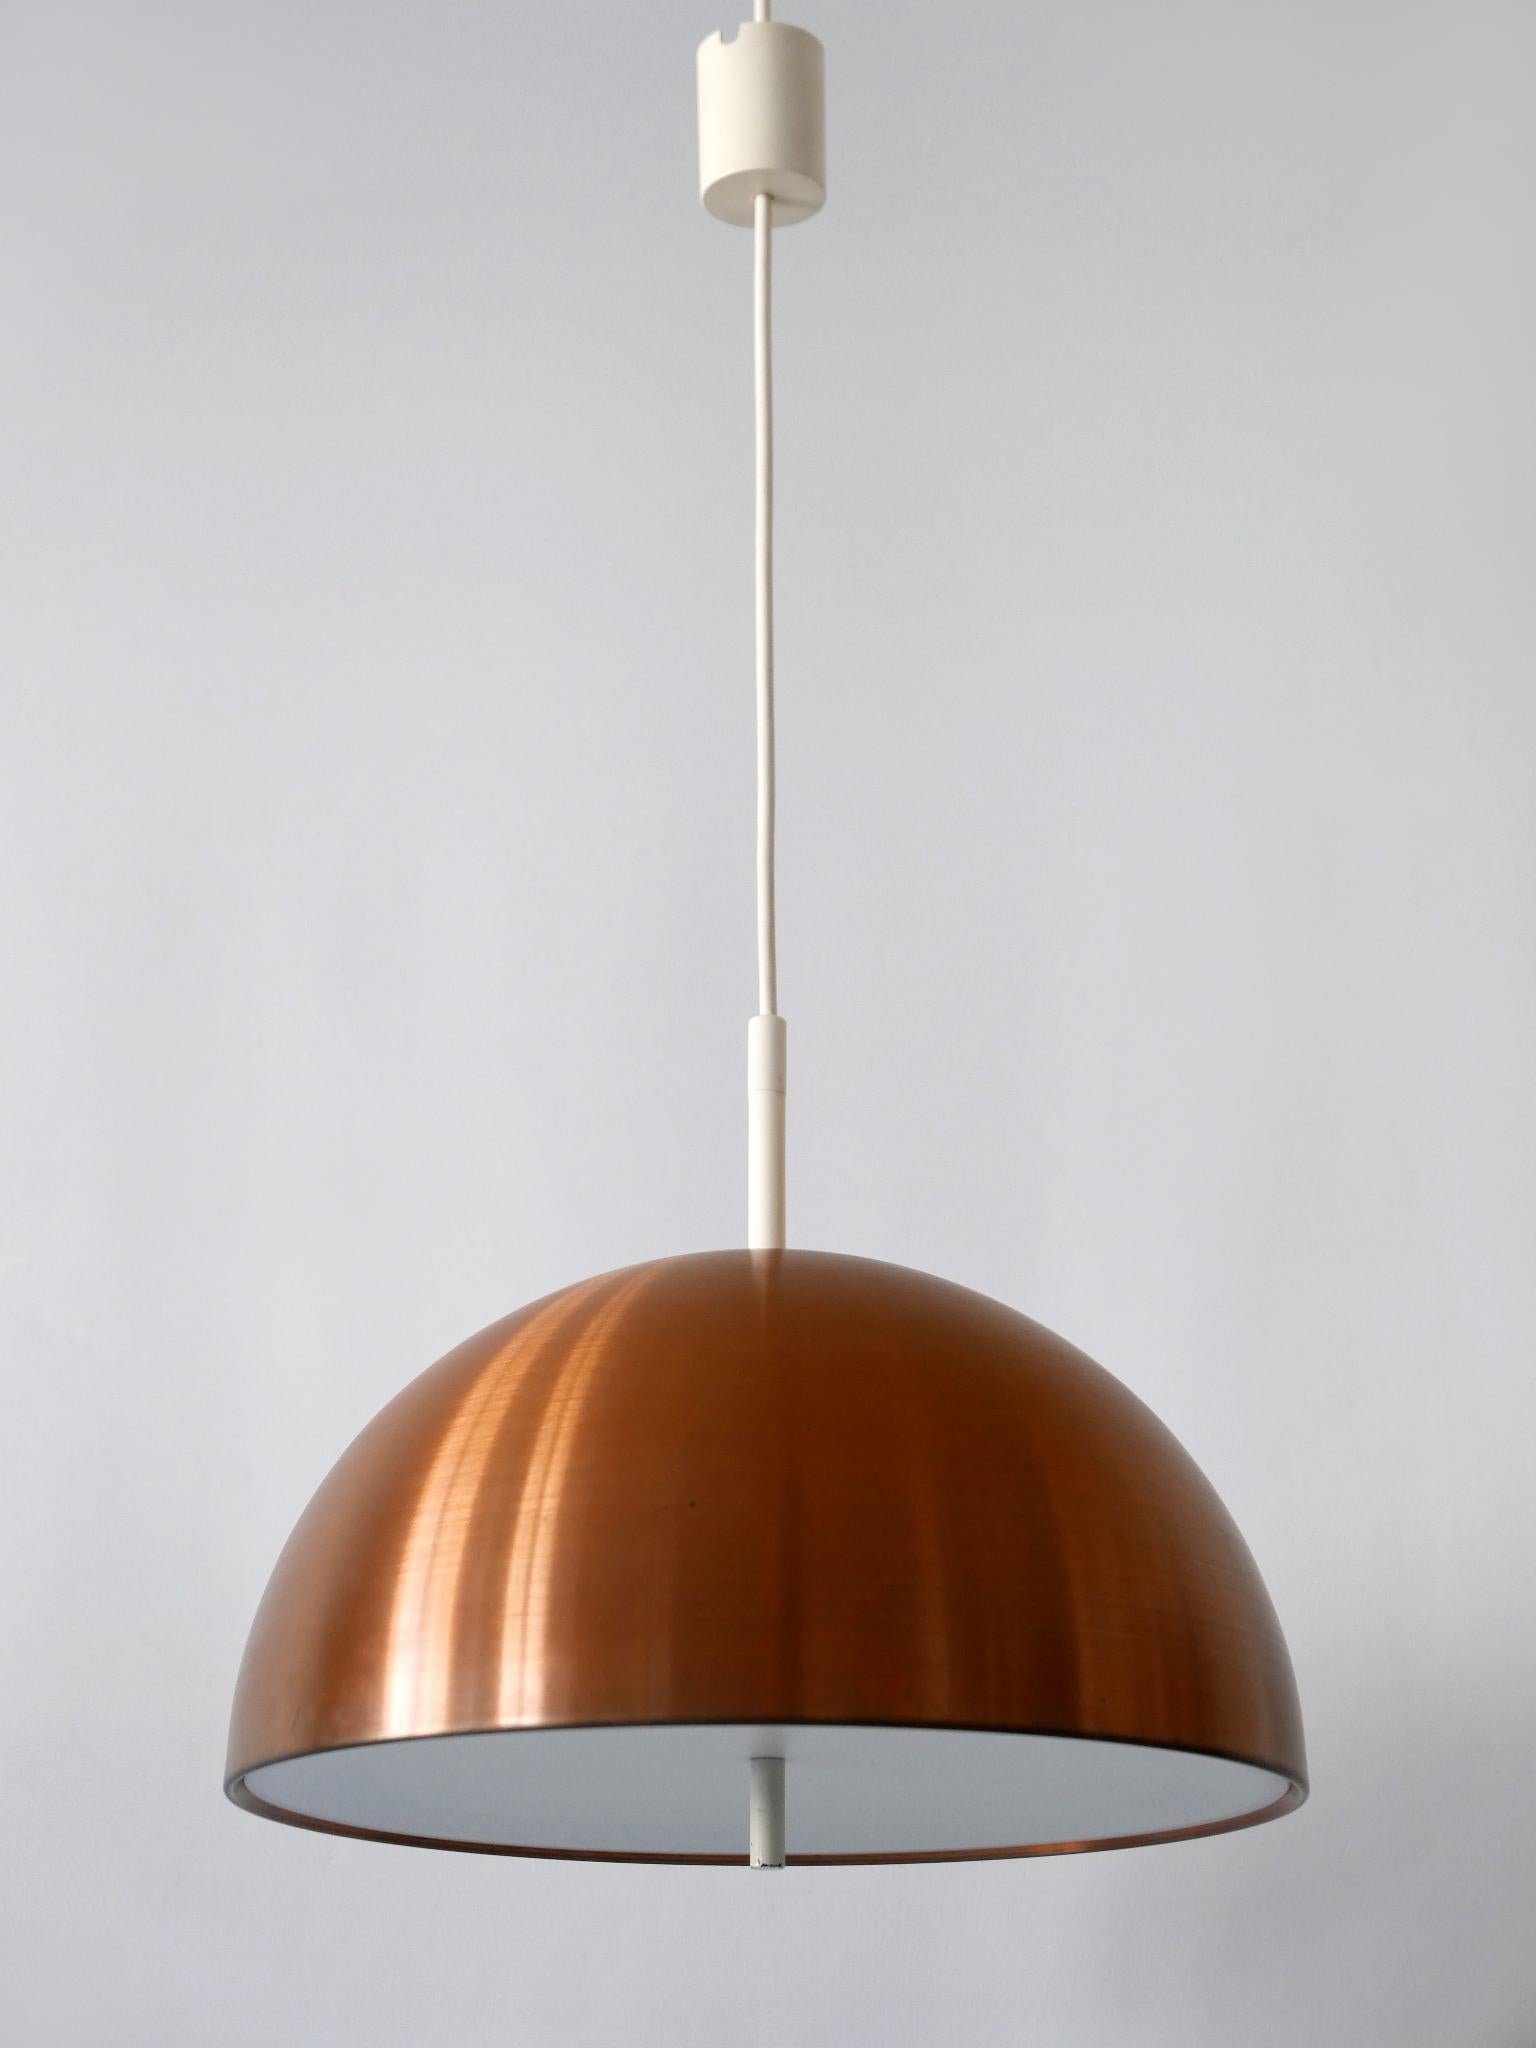 Minimalistic Mid-Century Modern copper pendant lamp or hanging light. Designed and manufactured by Staff & Schwarz Leuchtenwerke, 1960s, Germany.

Executed in copper sheet and plexiglass, the pendant lamp needs 2 x E27 / E26 Edison screw fit